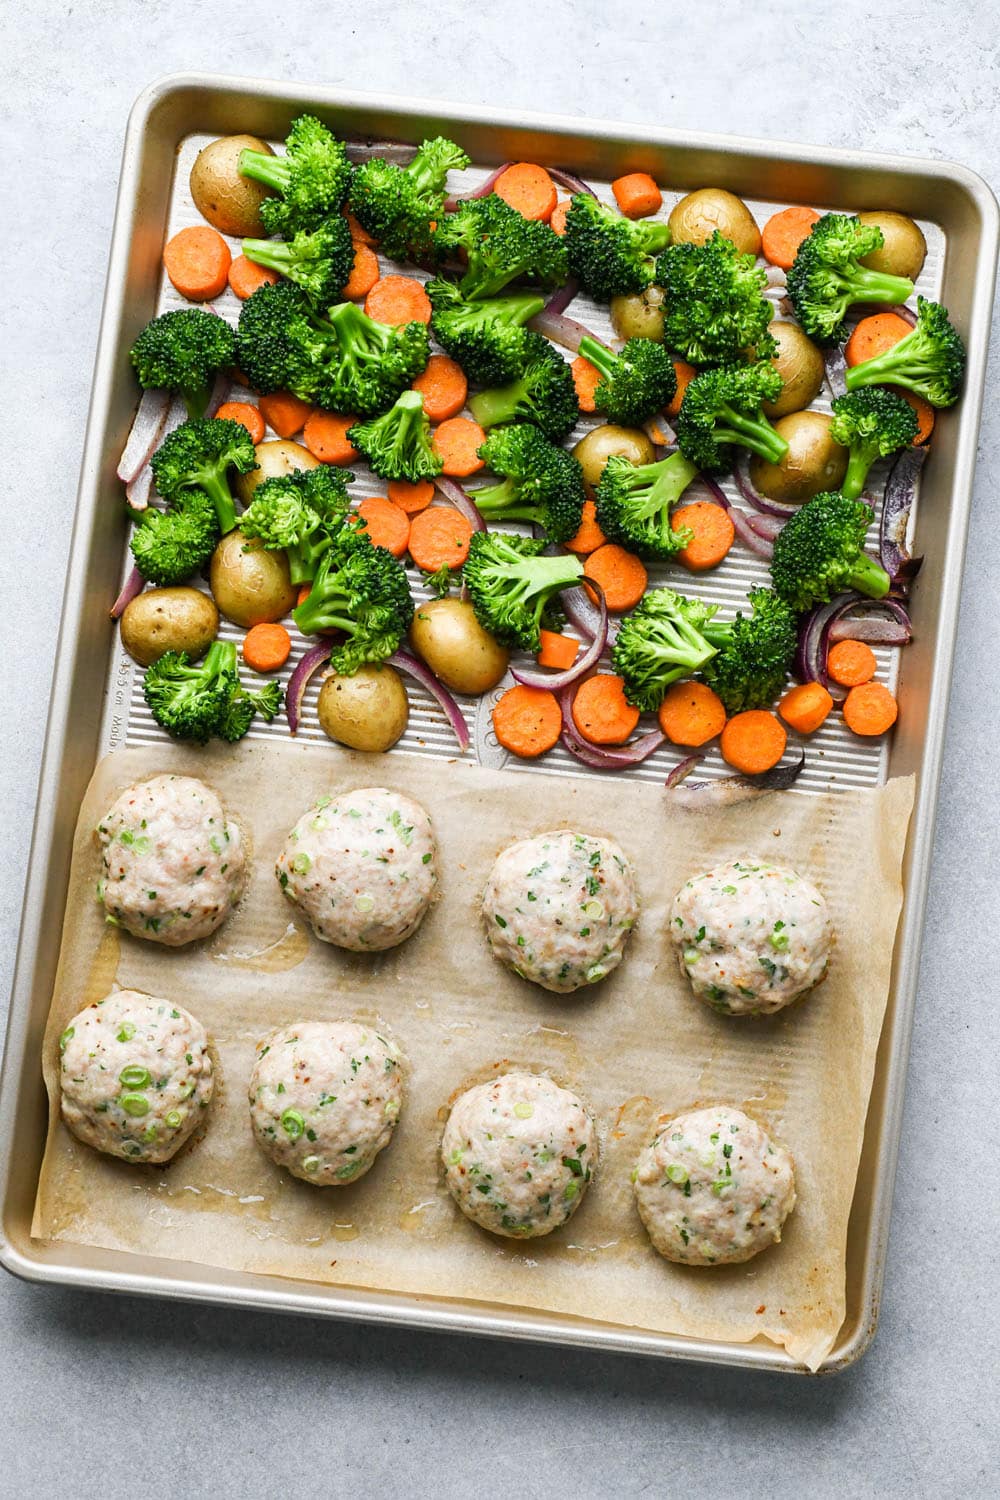 How to make Roasted Veggie Protein Bowls with Turmeric Tahini: Sheet pan with chicken patties and veggies partially baked, raw broccoli florets added to the veggie side of the sheet pan.